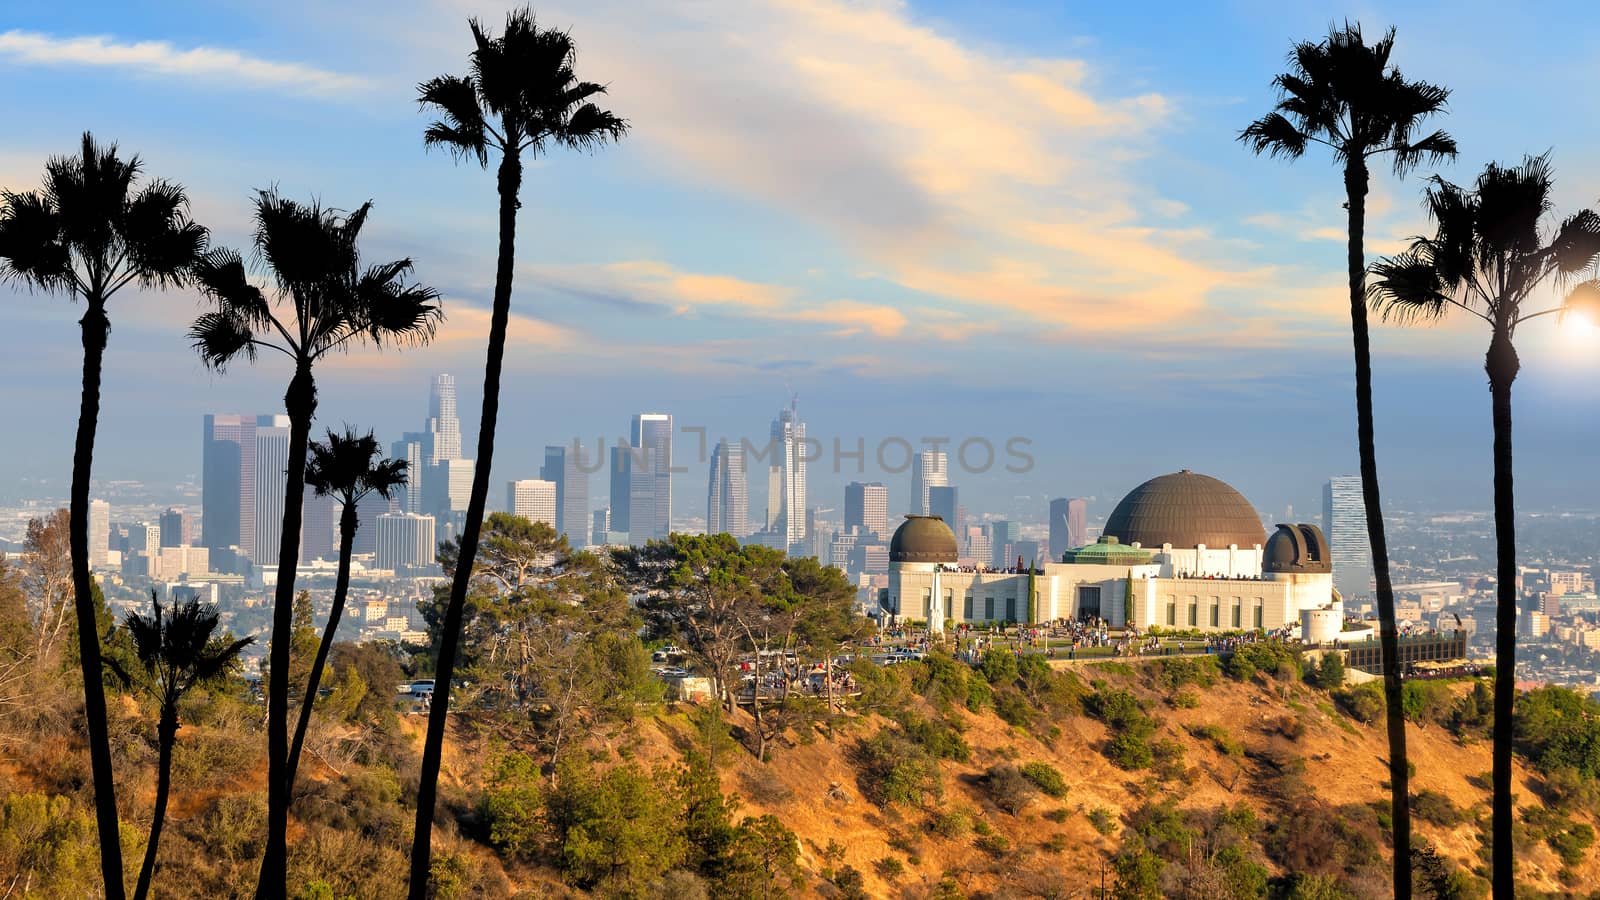 The Griffith Observatory and Los Angeles city skyline at sunset CA